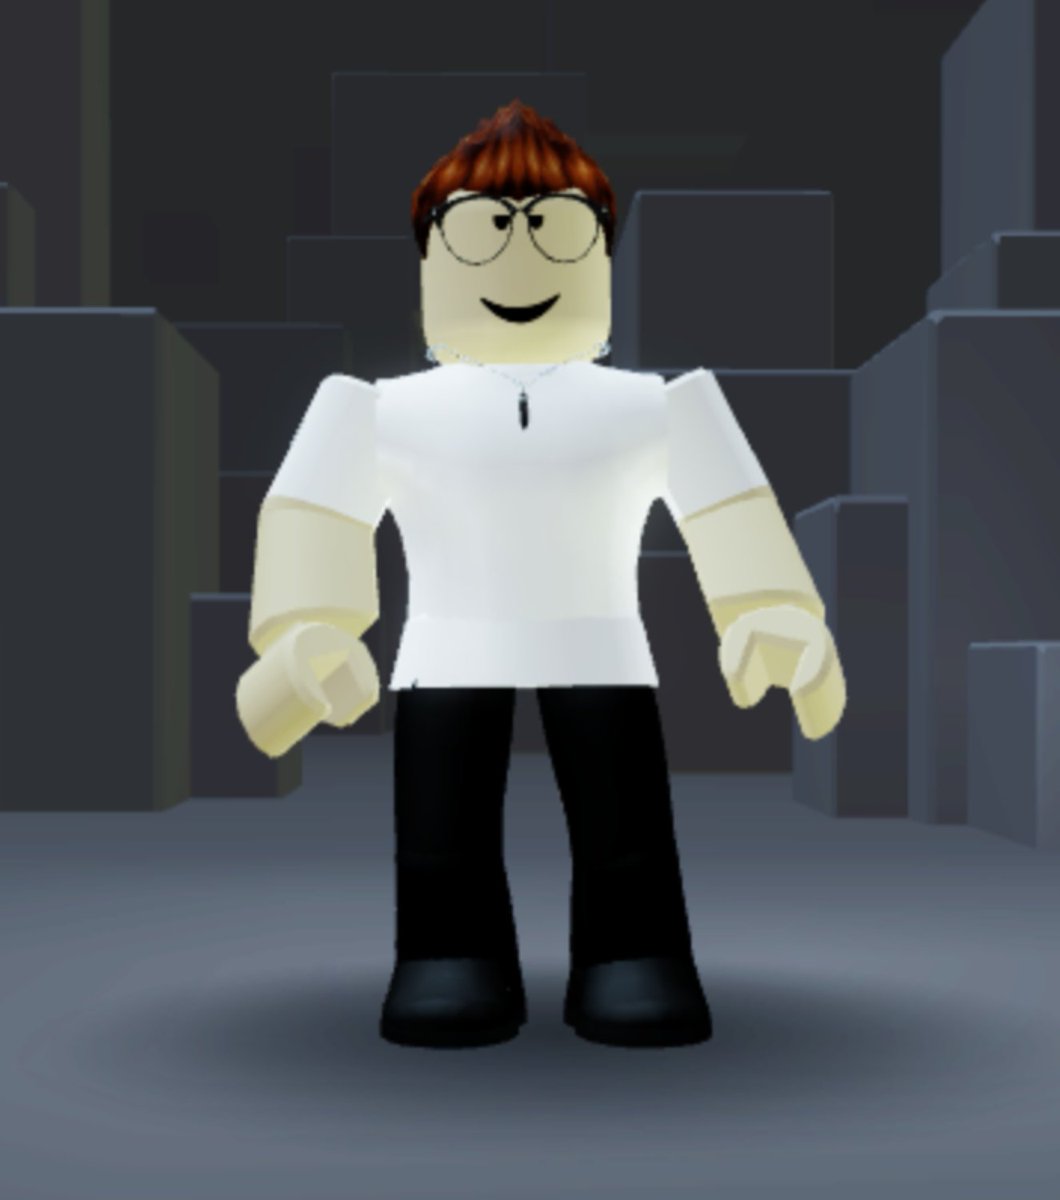 Robloxcharacter Hashtag On Twitter - roblox character pics